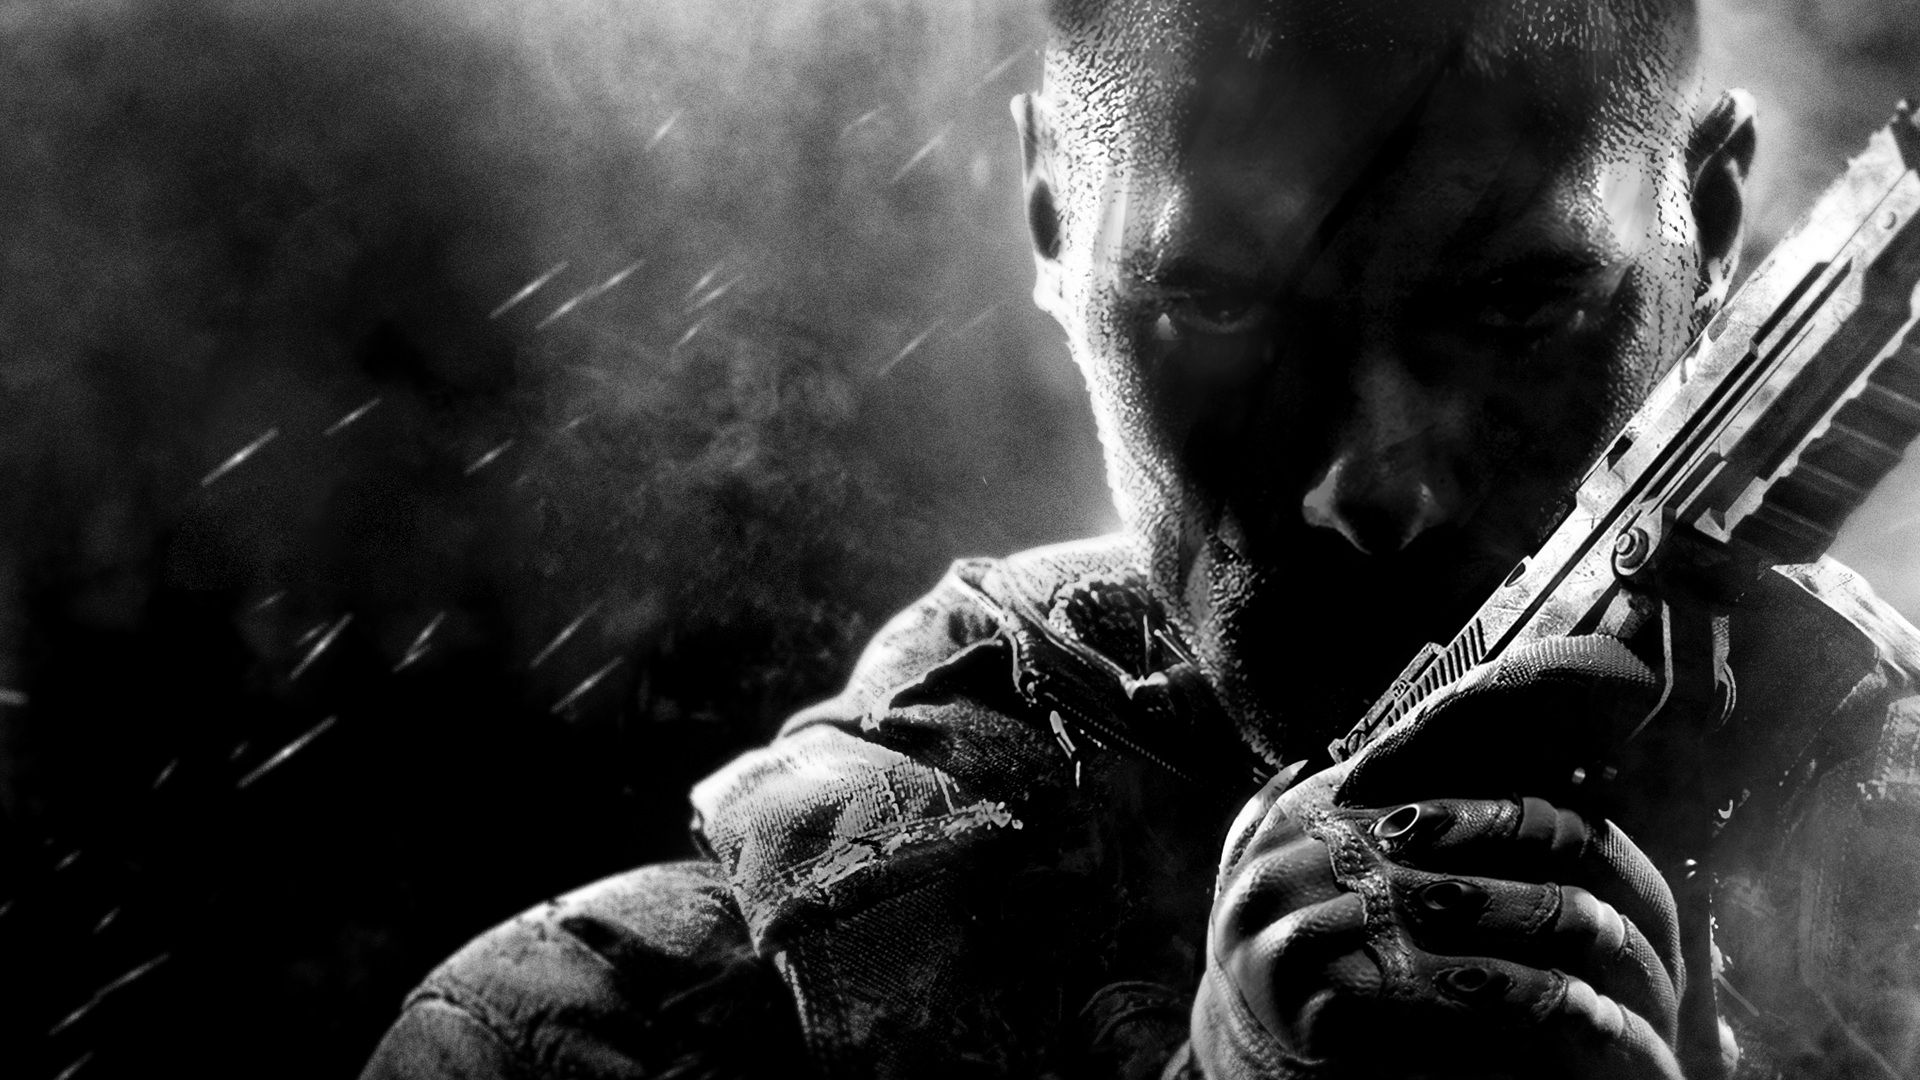 Call of Duty Black Ops 2 II Game Wallpapers  HD Wallpapers  ID 11378